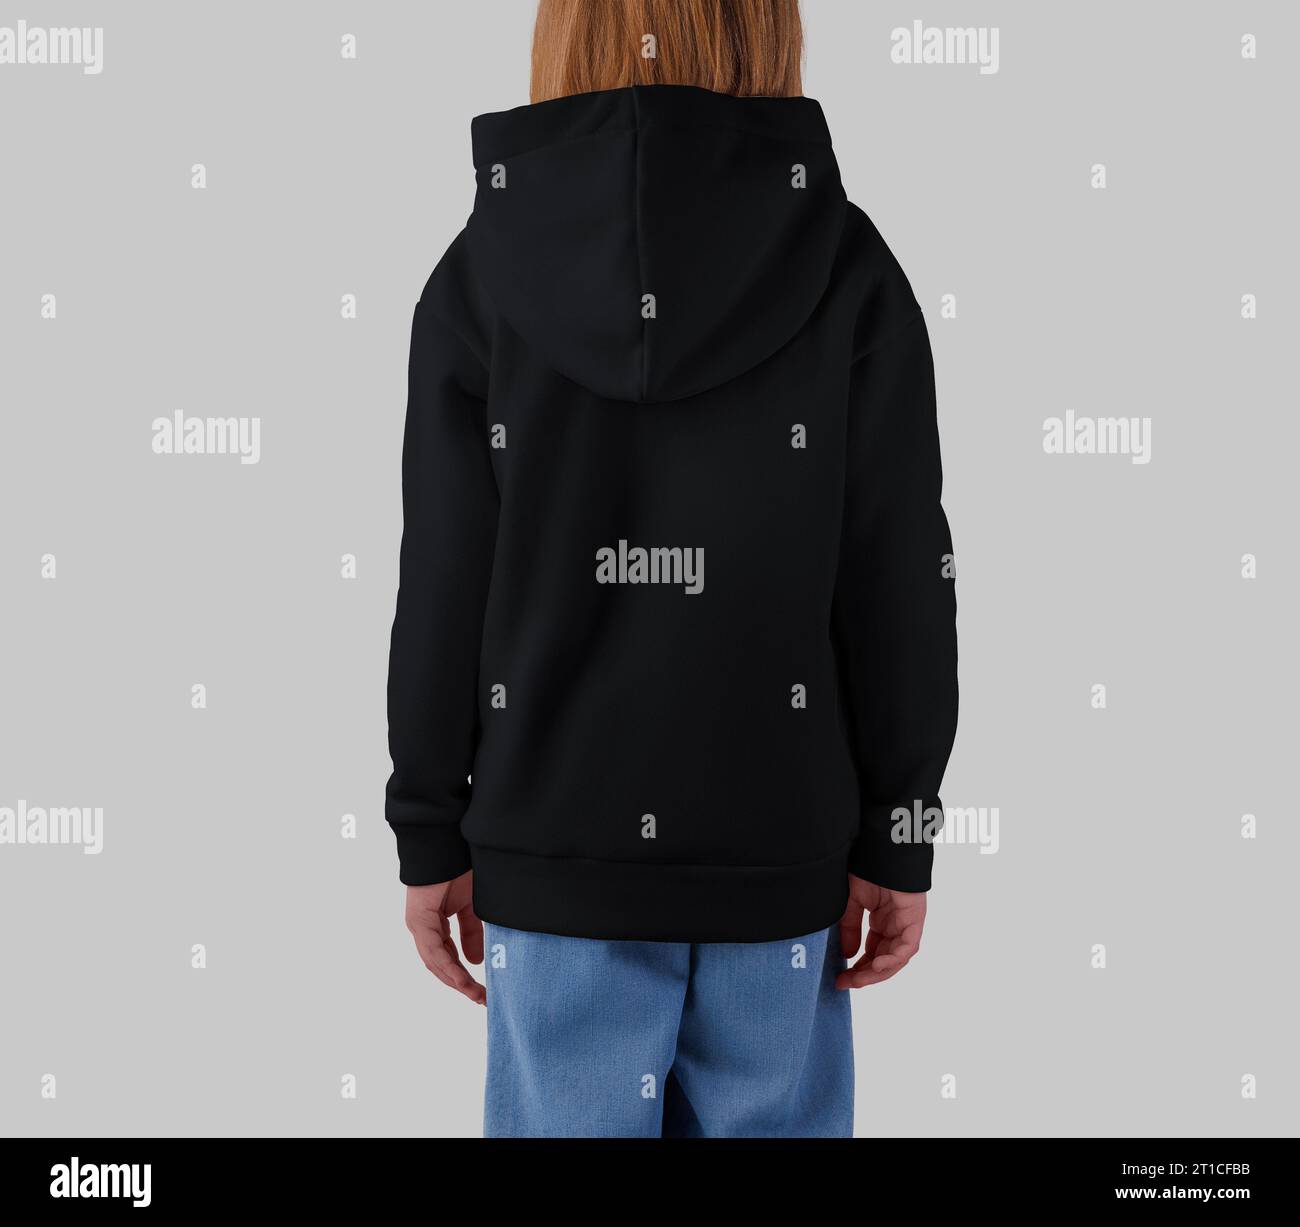 Template of a black hoodie on a blonde girl, back view, shirt for design, print, branding. Mockup of warm kid's clothing, isolated on background. Prod Stock Photo